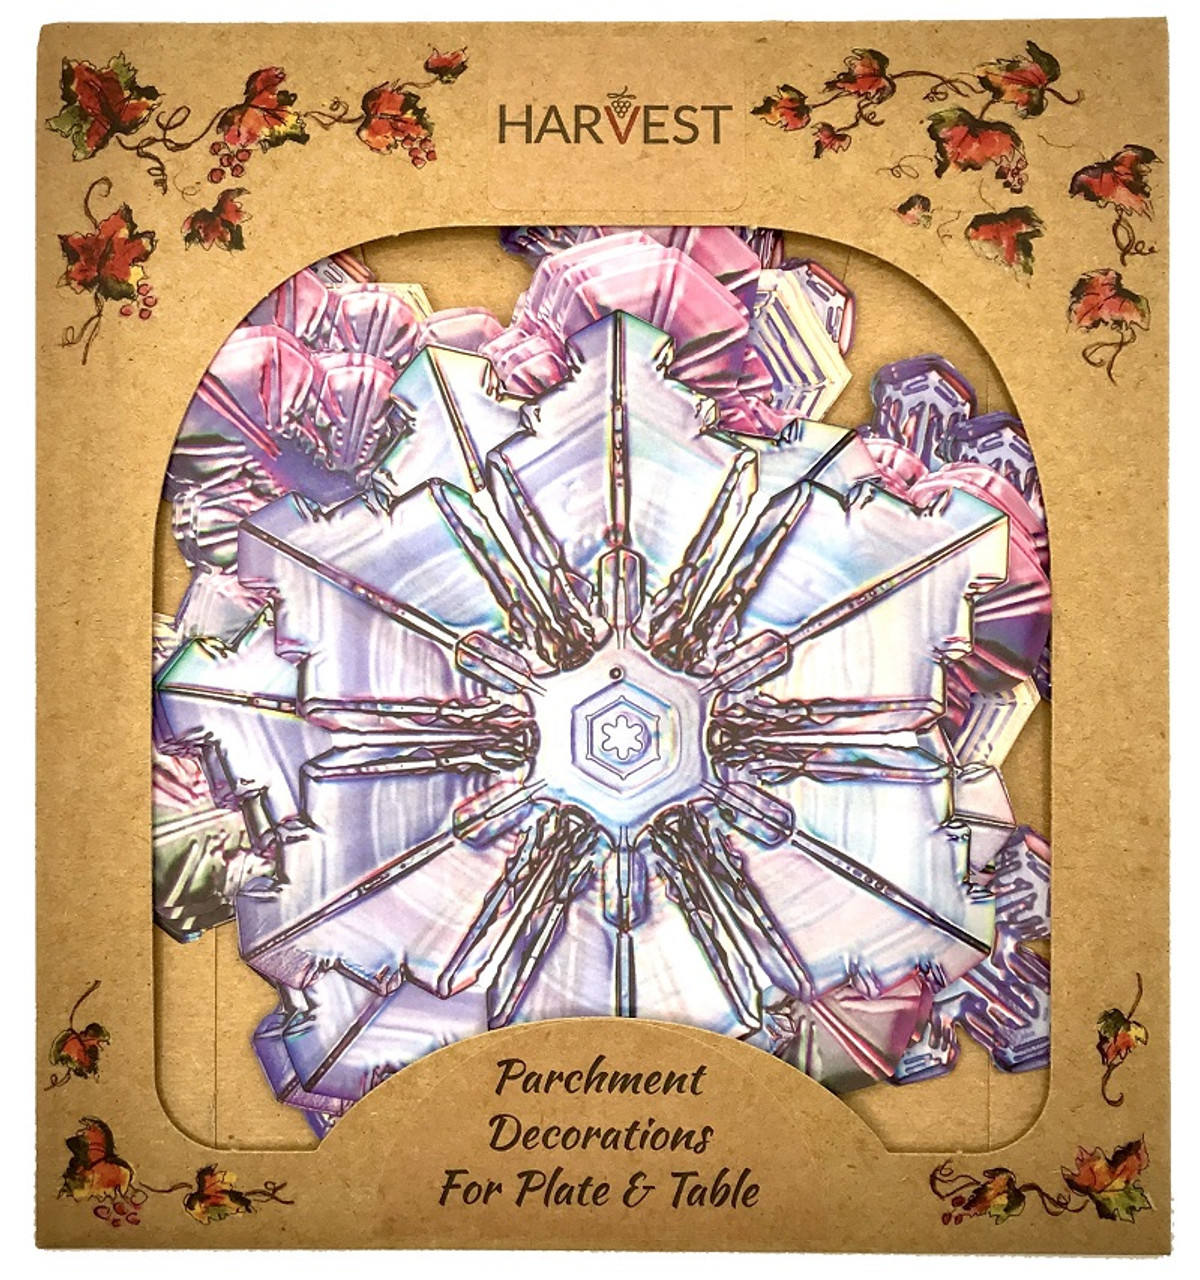 Sisson Parchment Harvest Leaves - Snowflake - Pack of 20 (SD 1113)